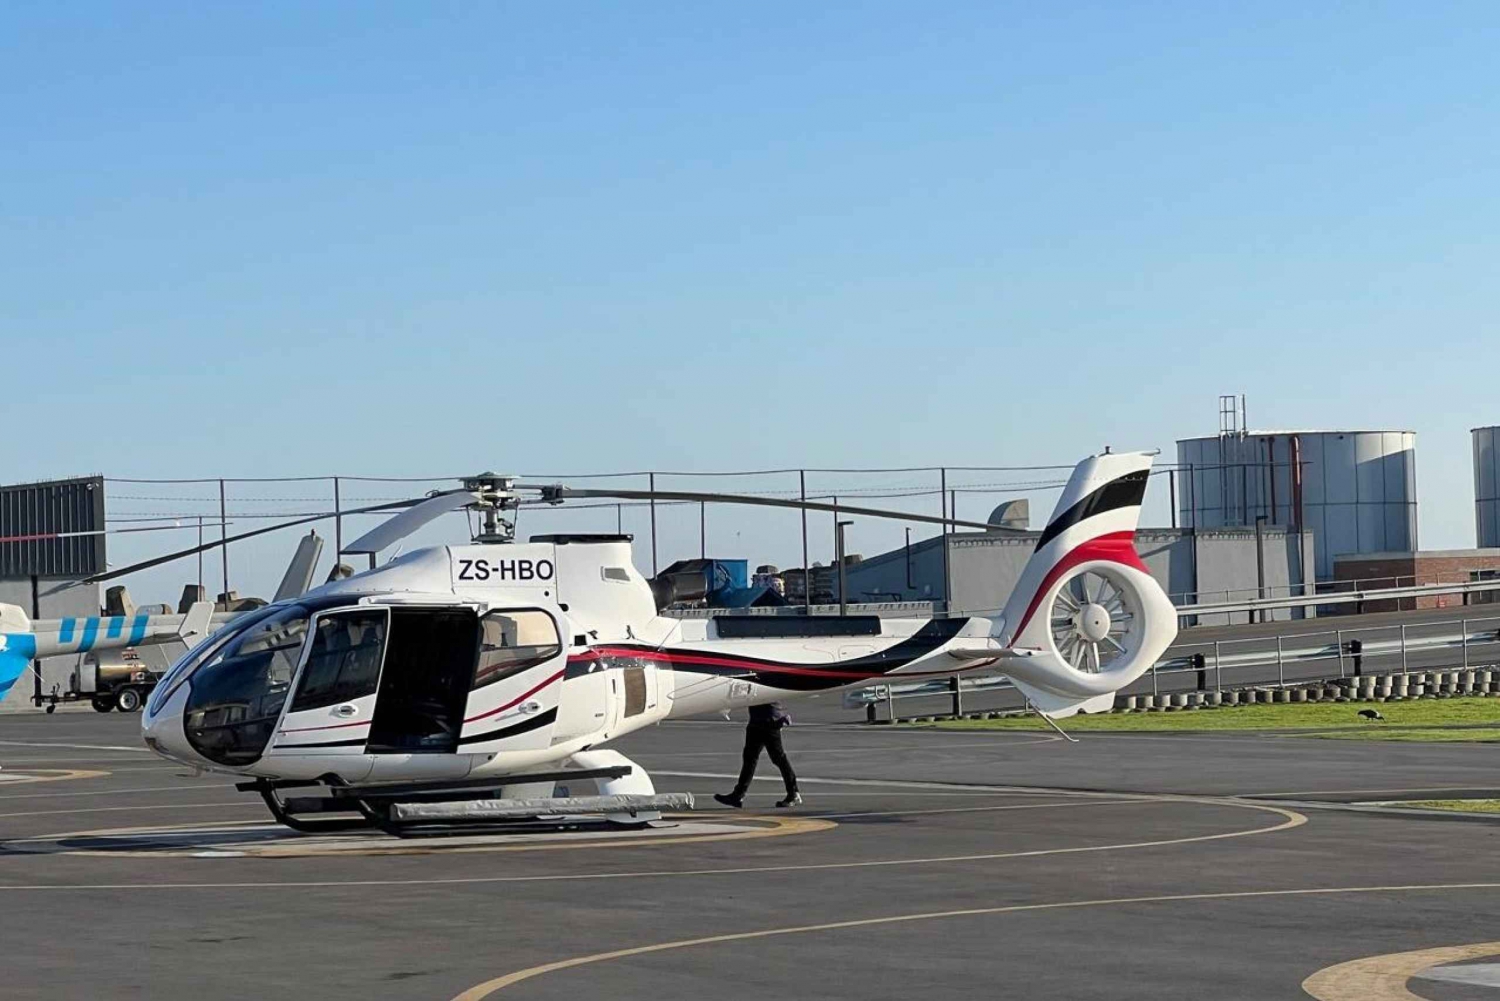 A 30-minute helicopter tour of the Constantia Wine Region